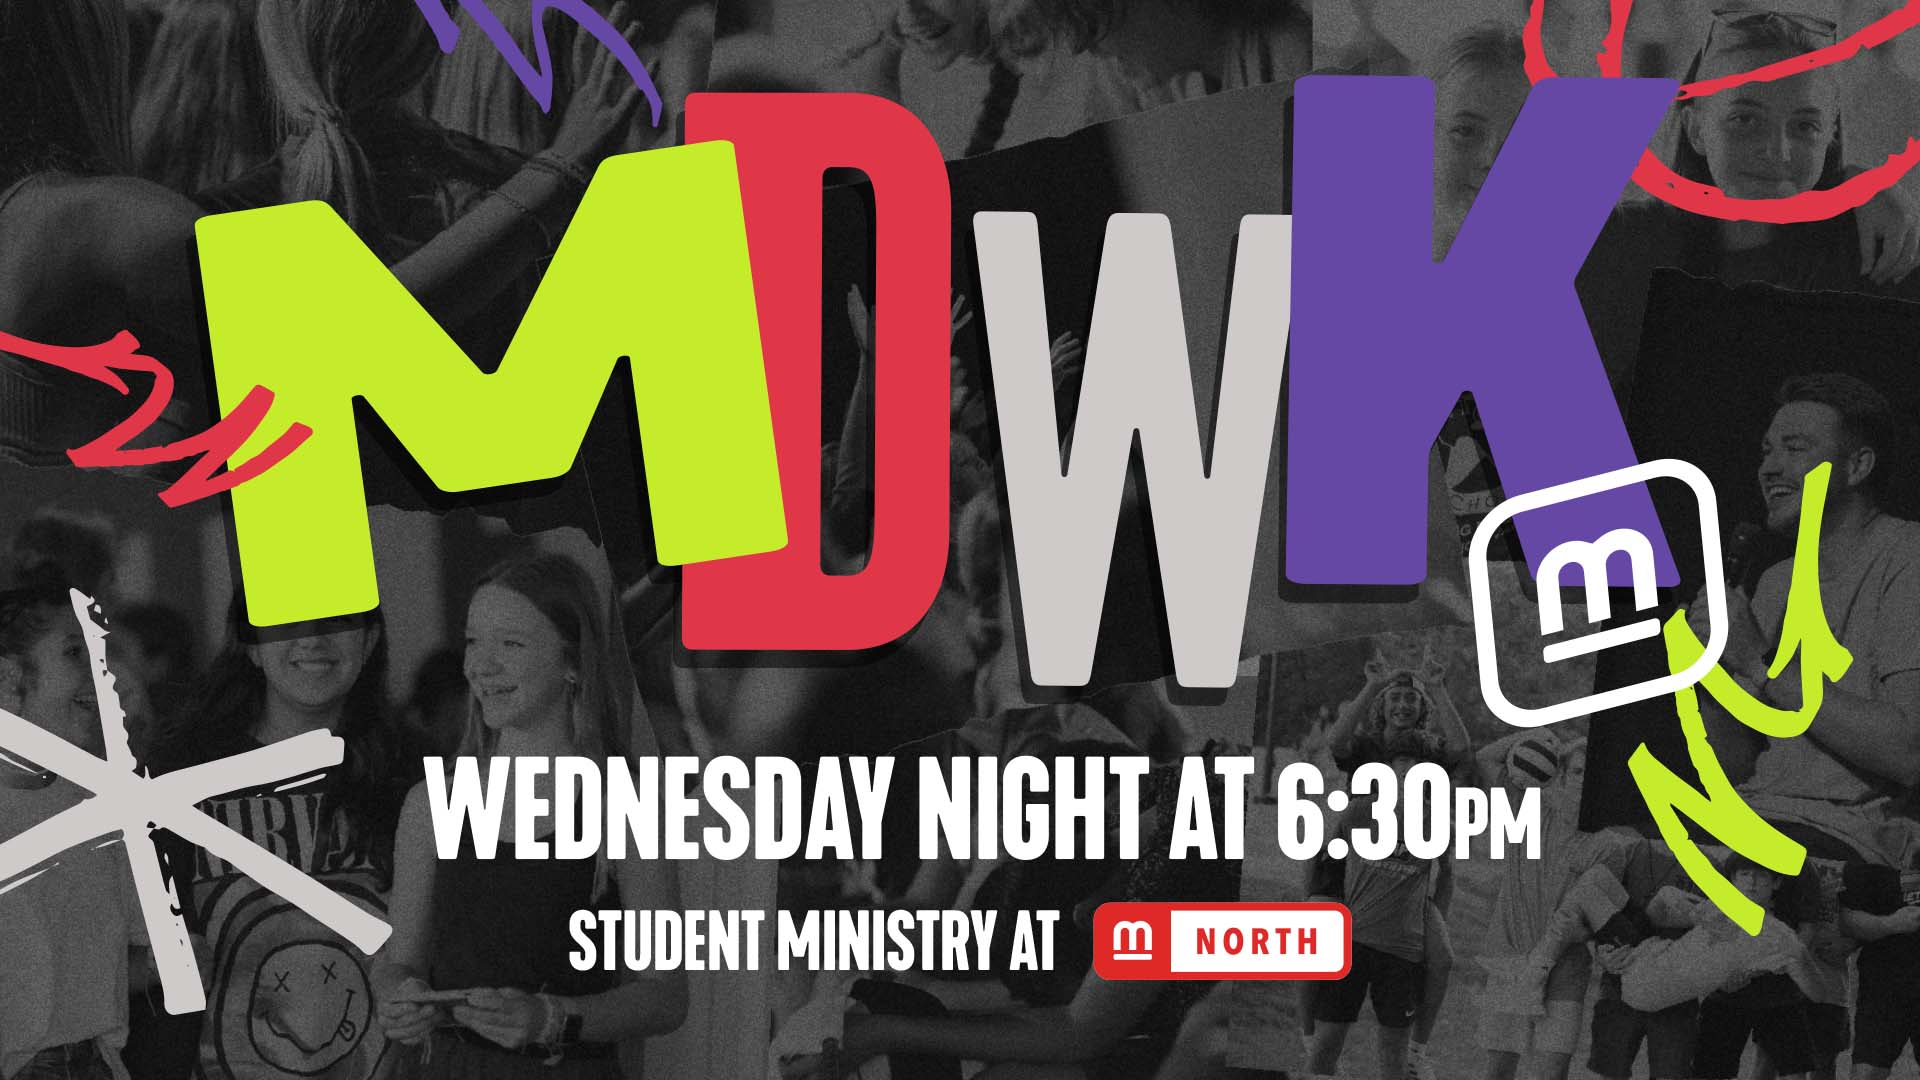 Mission City Students Ministry Midweek - North Campus